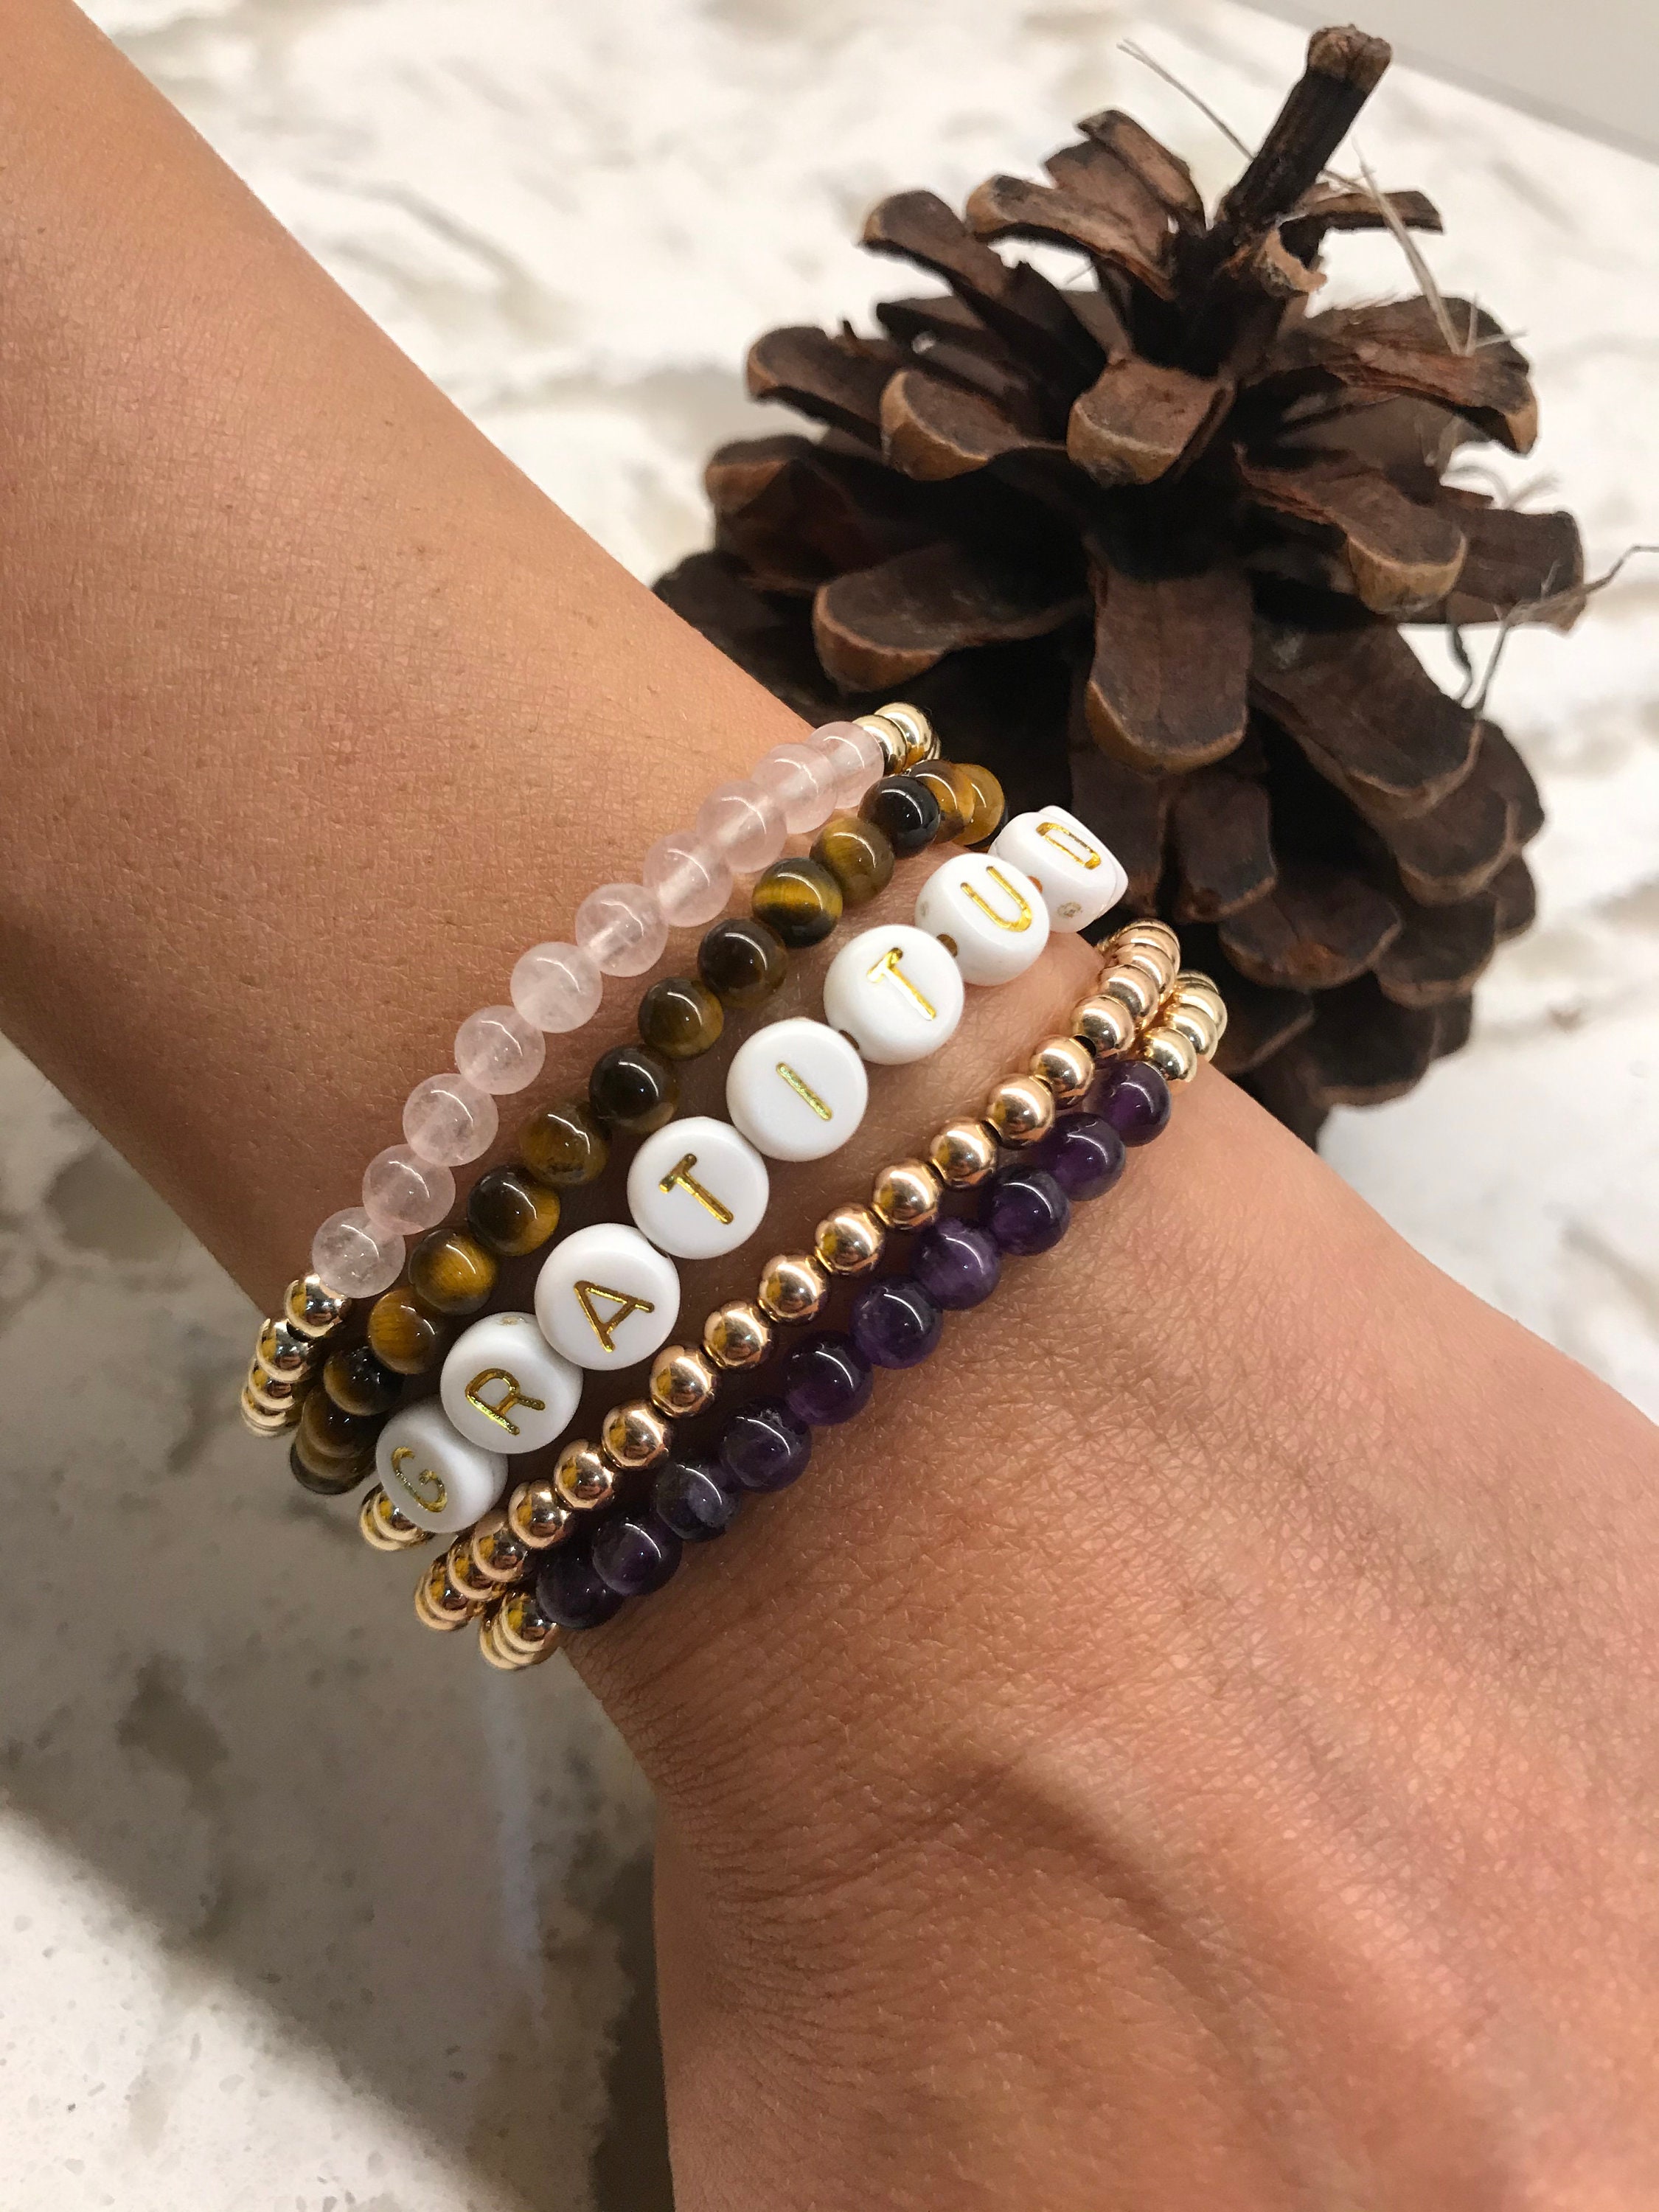 Large Bead Matte Amethyst Bracelet - Alignment with Higher Self - Minera  Emporium Crystal & Mineral Shop